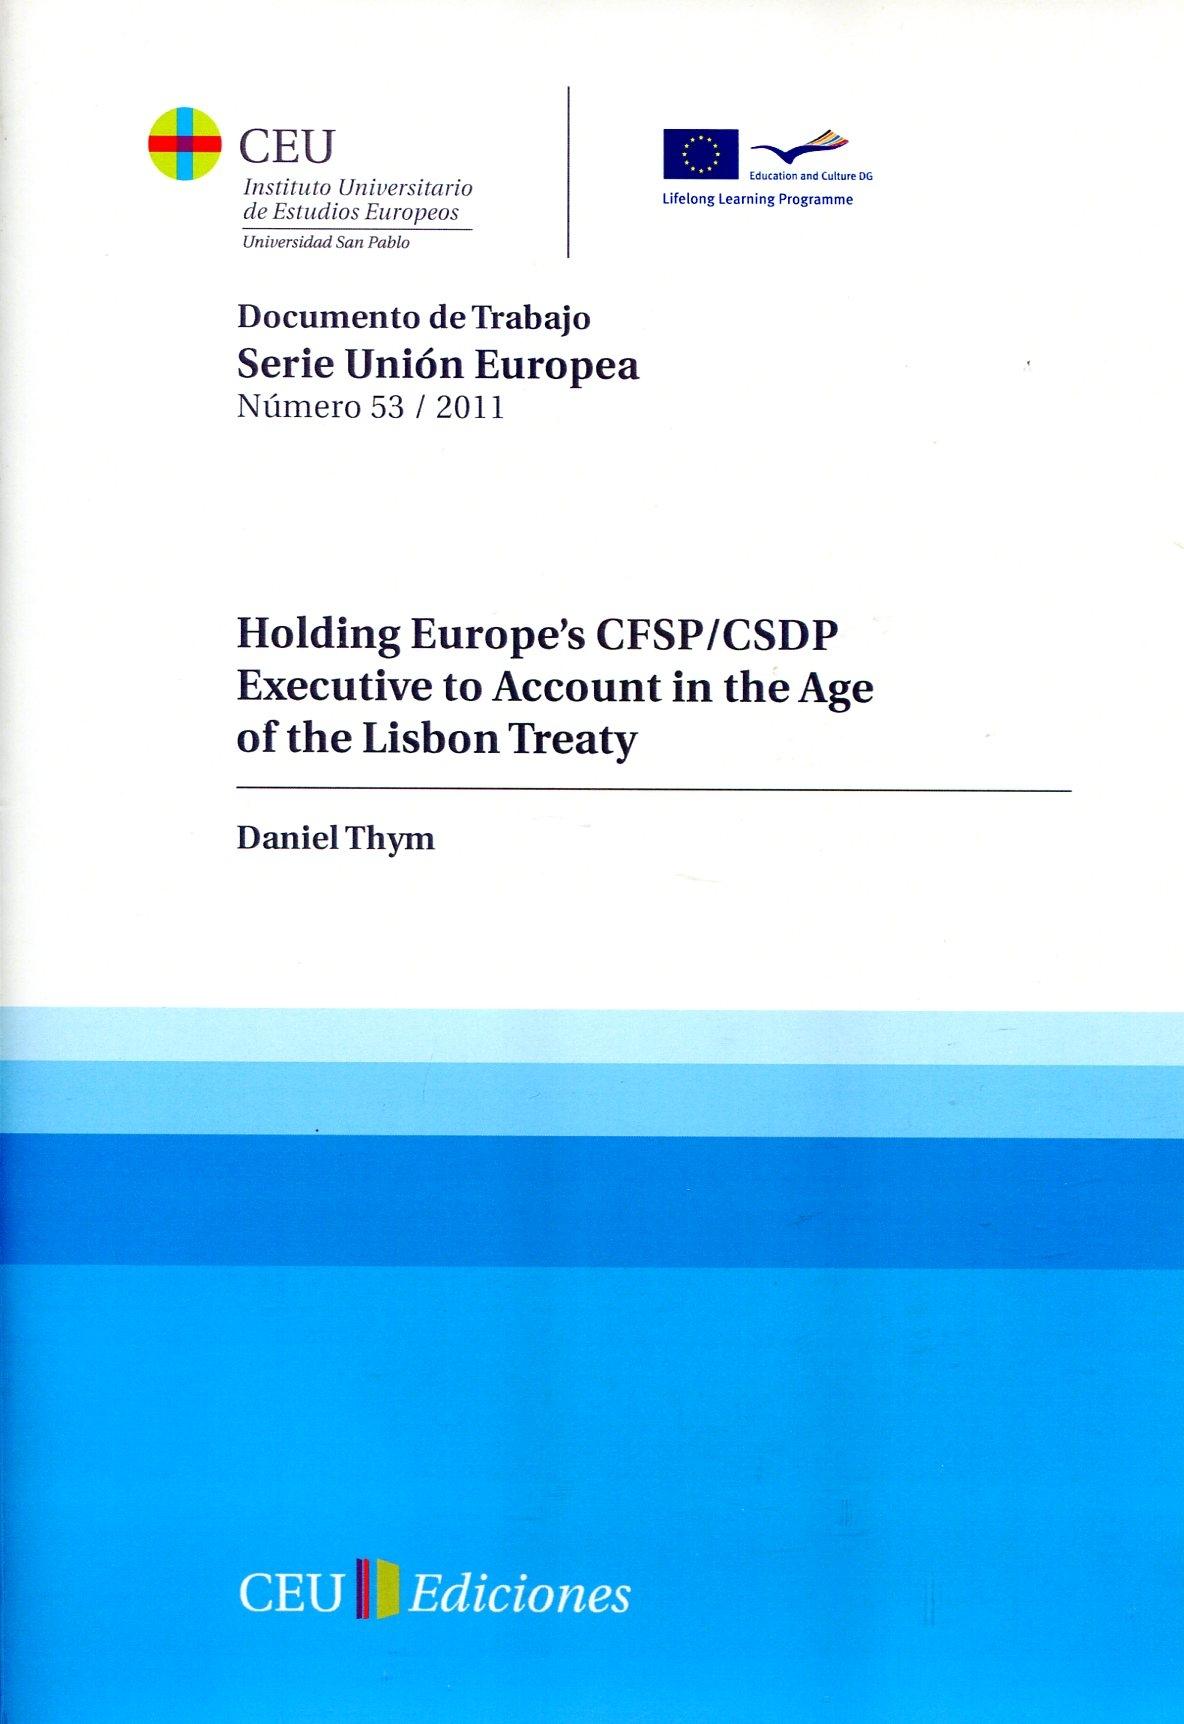 Holding Europe's CFSP/CSDP "Executive to Account in the Age of the Lisbon Treaty"